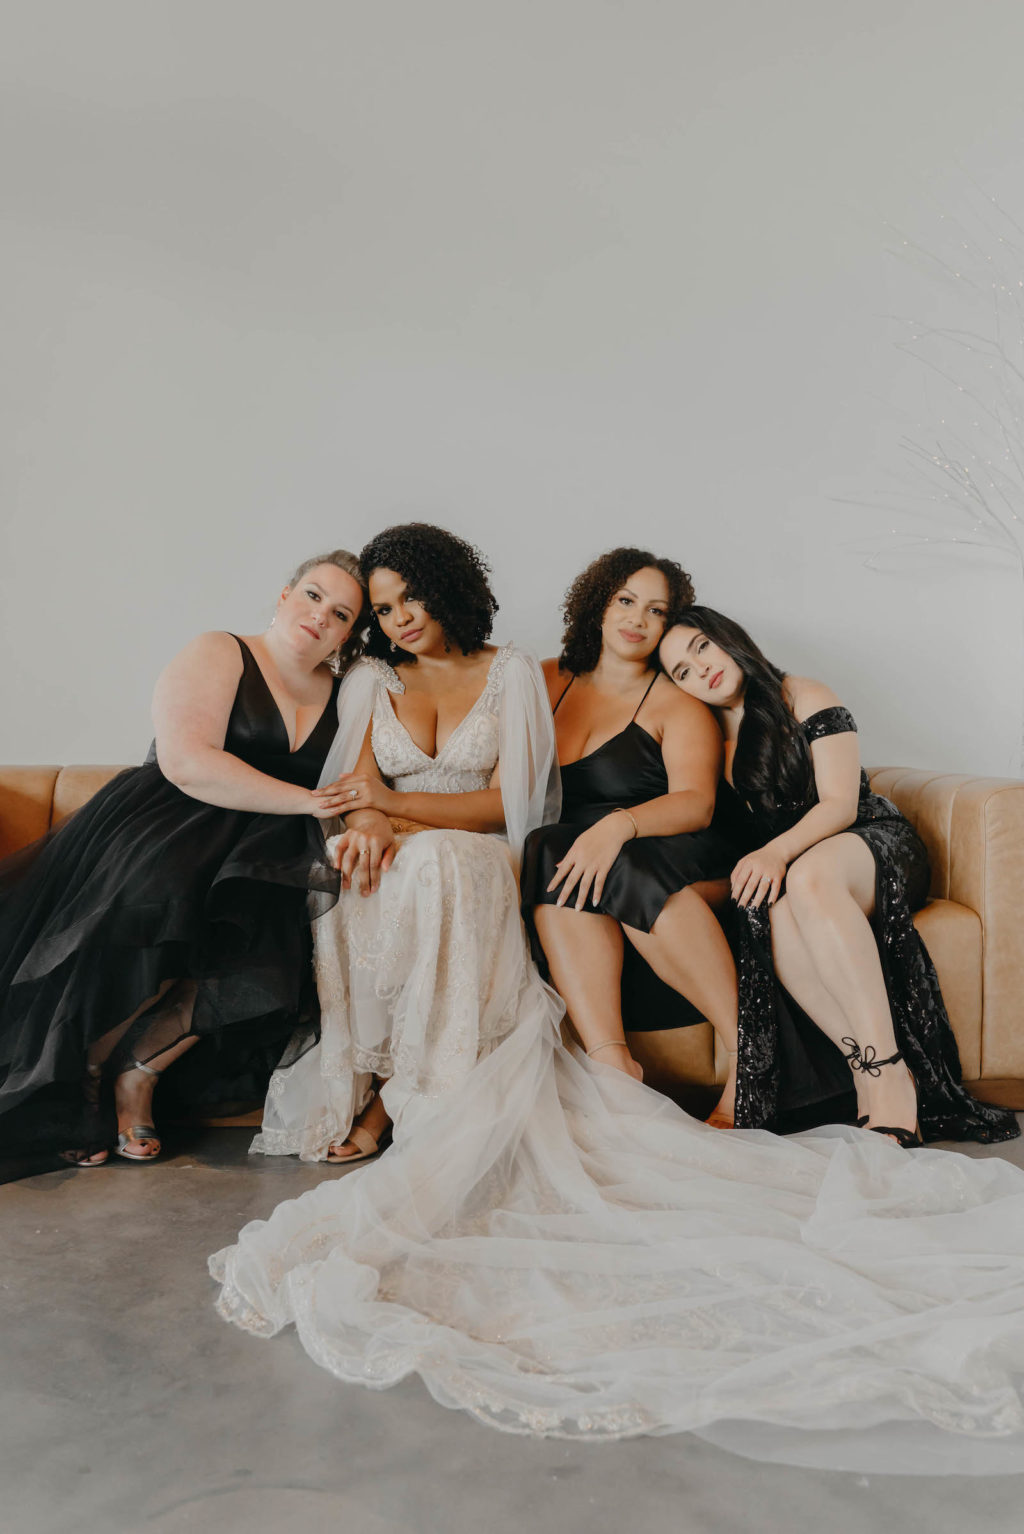 Indoor Bridal Party Portrait in Tampa Wedding Venue Hyde House | Illusion Lace Embroidered Beaded V Neck Wedding Dress Bridal Gown with Sheer Tulle Cape Sleeves by Designer Amalia Carrara Bridal | Black Formal Elegant Bridesmaid Dresses